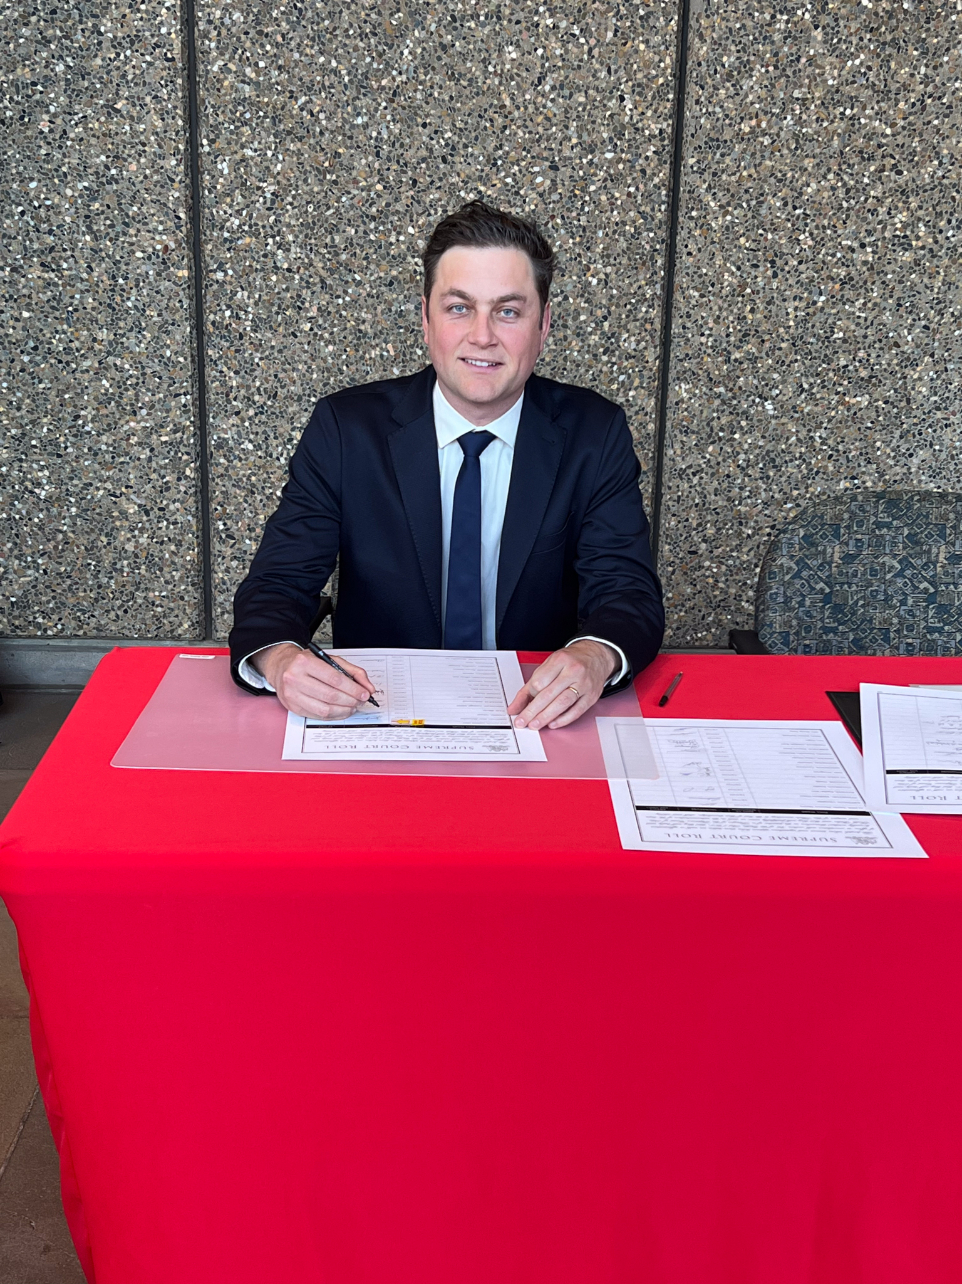 Man sitting at desk with red table clith signs official documents